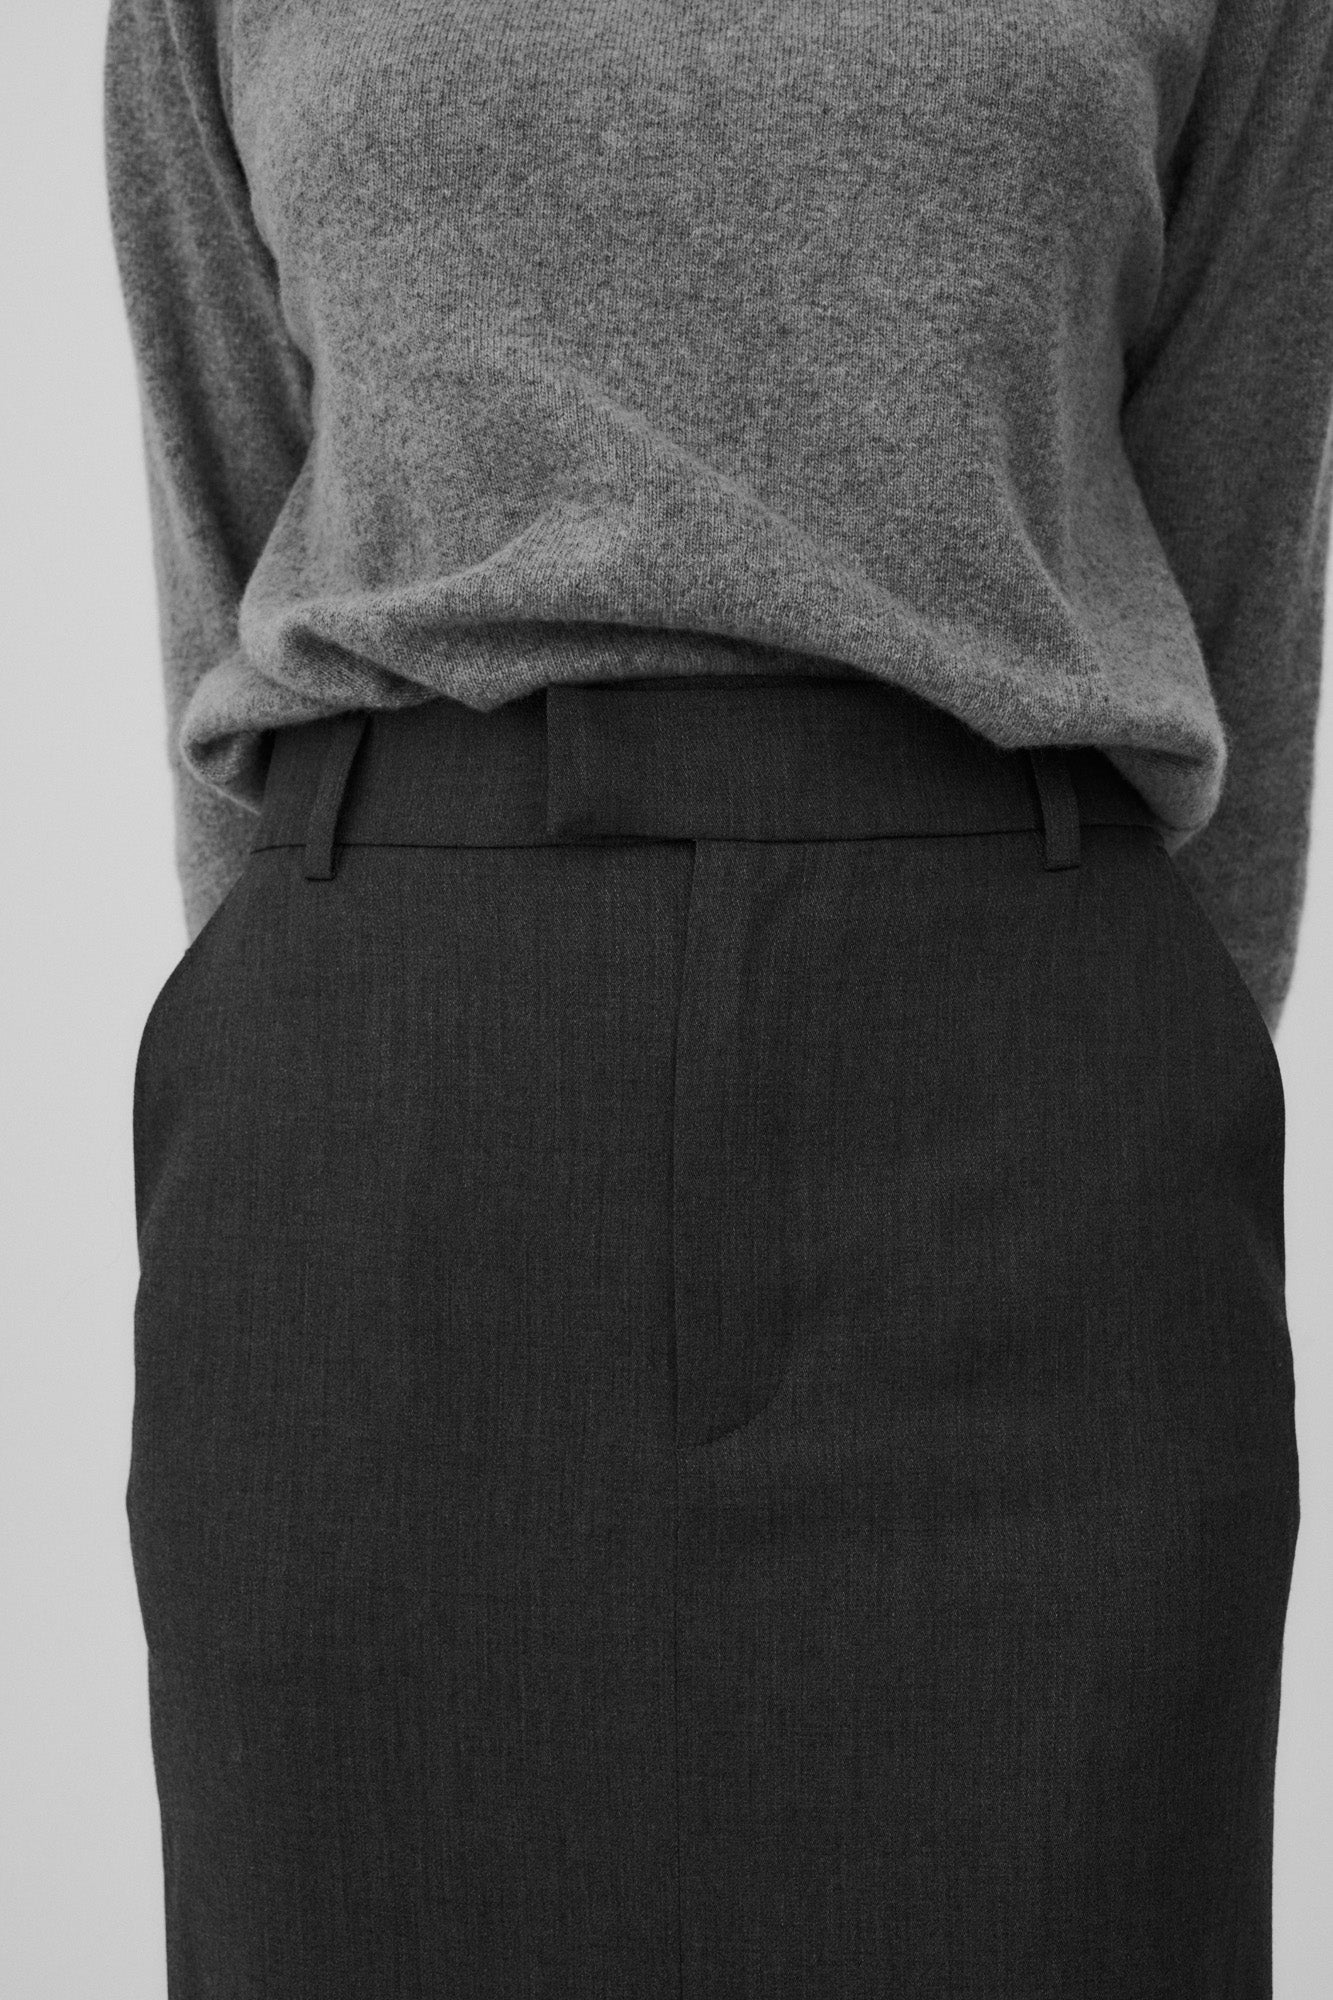 Wool blend skirt / 07 / 04 / granite grey *sweater-in-cashmere-16-13-grey-stone* ?The model is 177cm tall and wears size S?